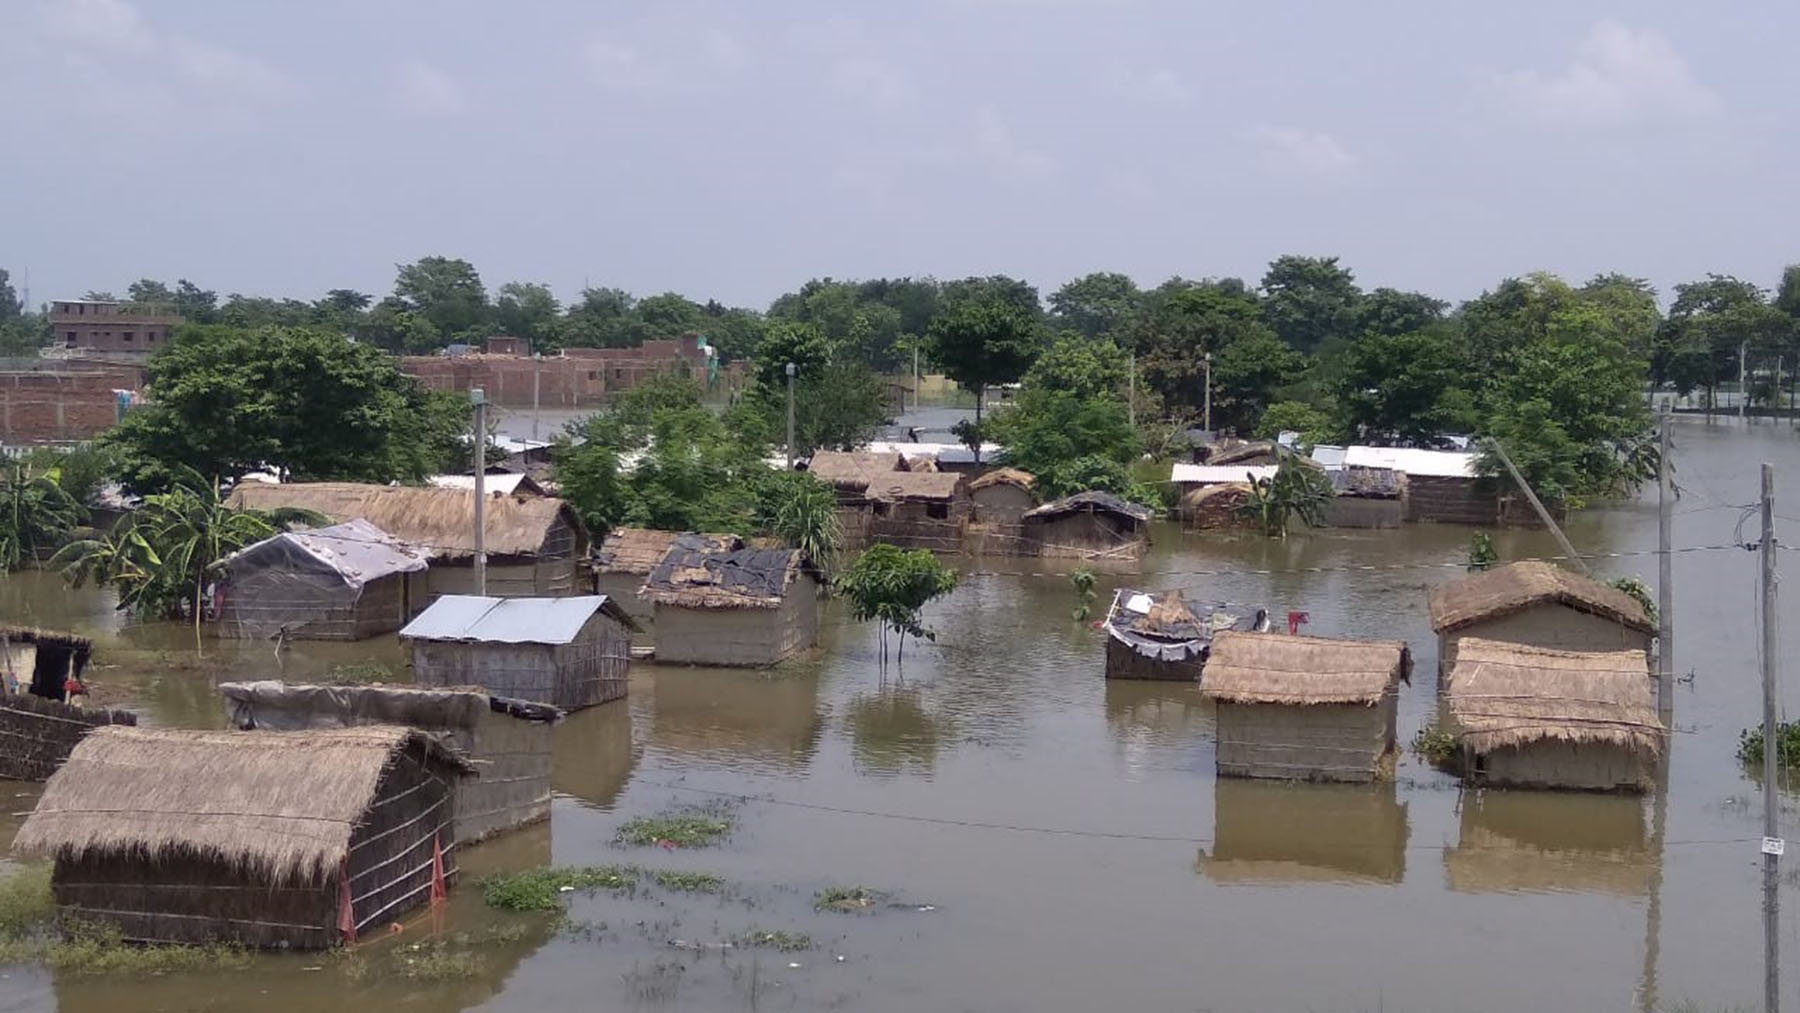 Widespread Flooding Has Devastated South Asia. It’s Only the Beginning.